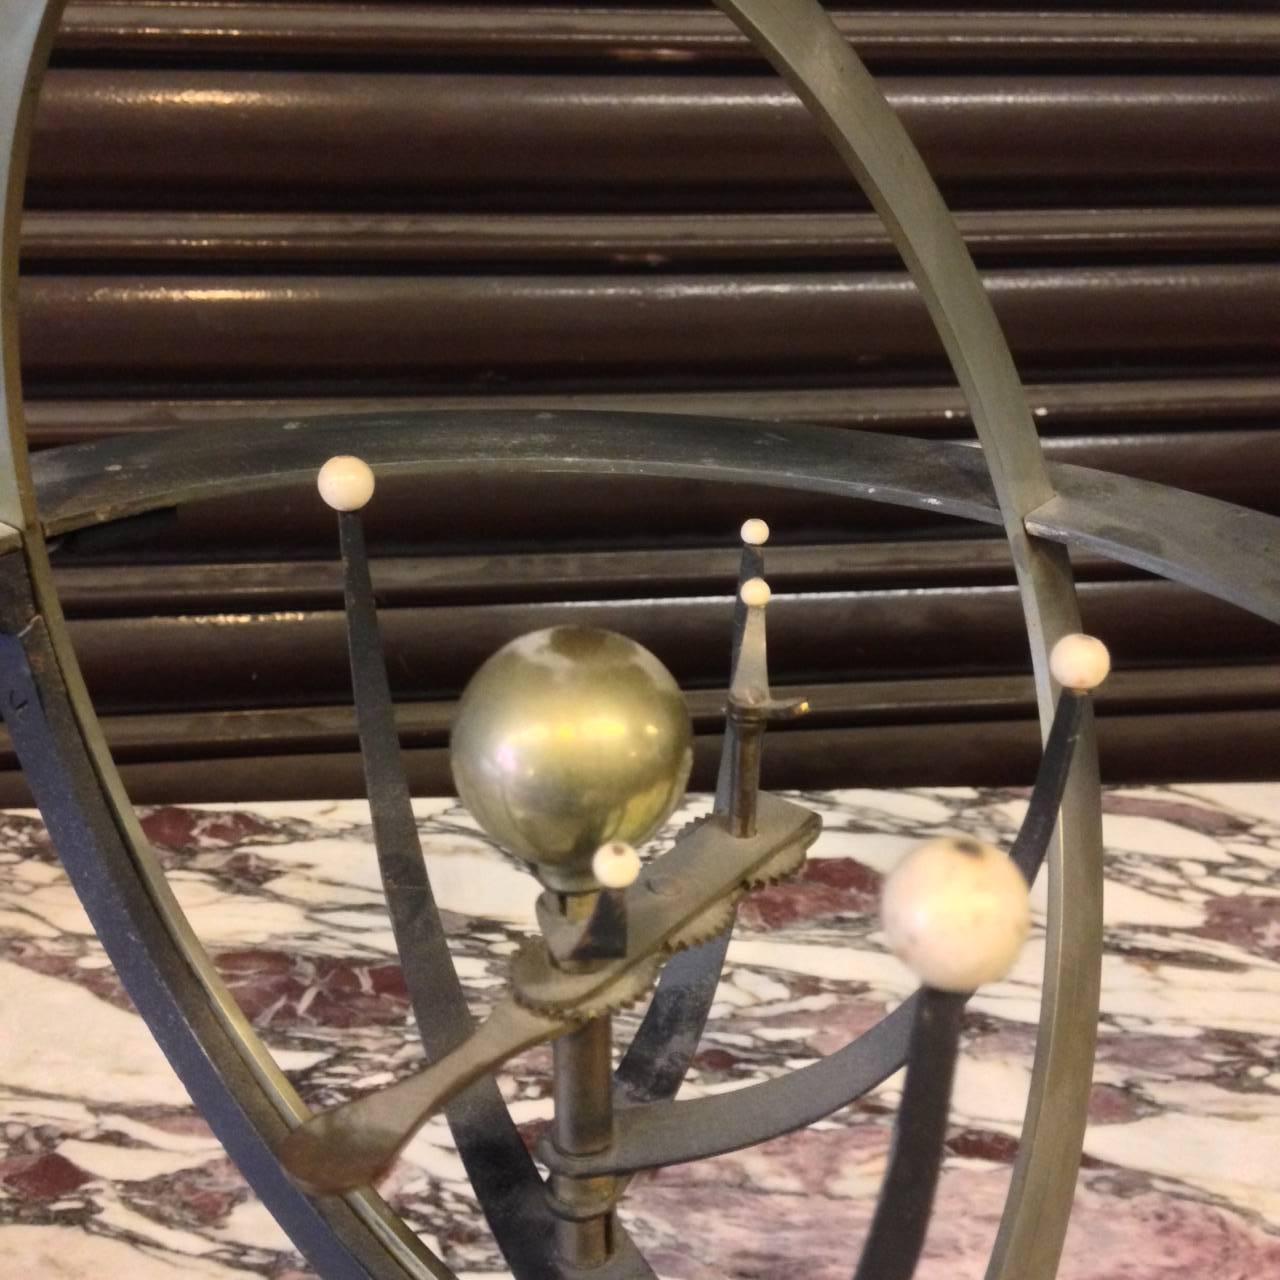 Very beautiful Copernicus armillary sphere. Diem Model middle of the 19th century. Burst of wood on the base bottom. One small ball missing. Engraved brass circle. Very rare and in very good condition.